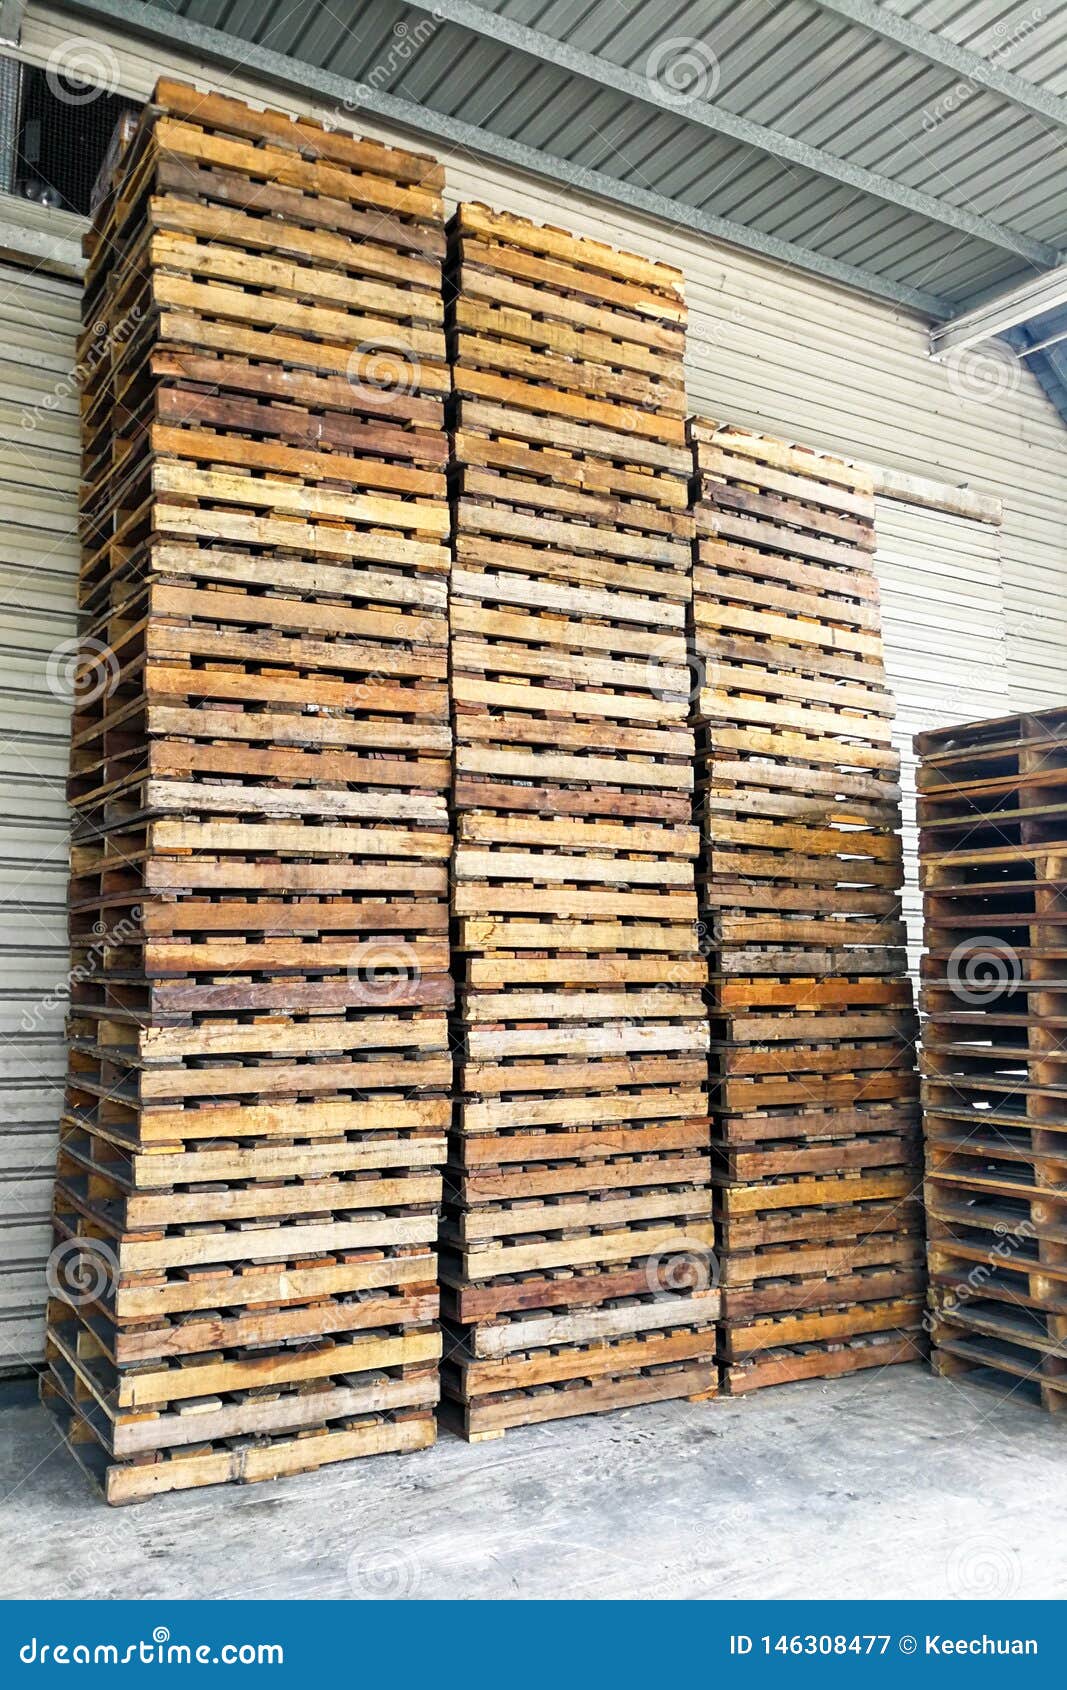 Stack Of Wooden Pallets At Warehouse. Transportation ...